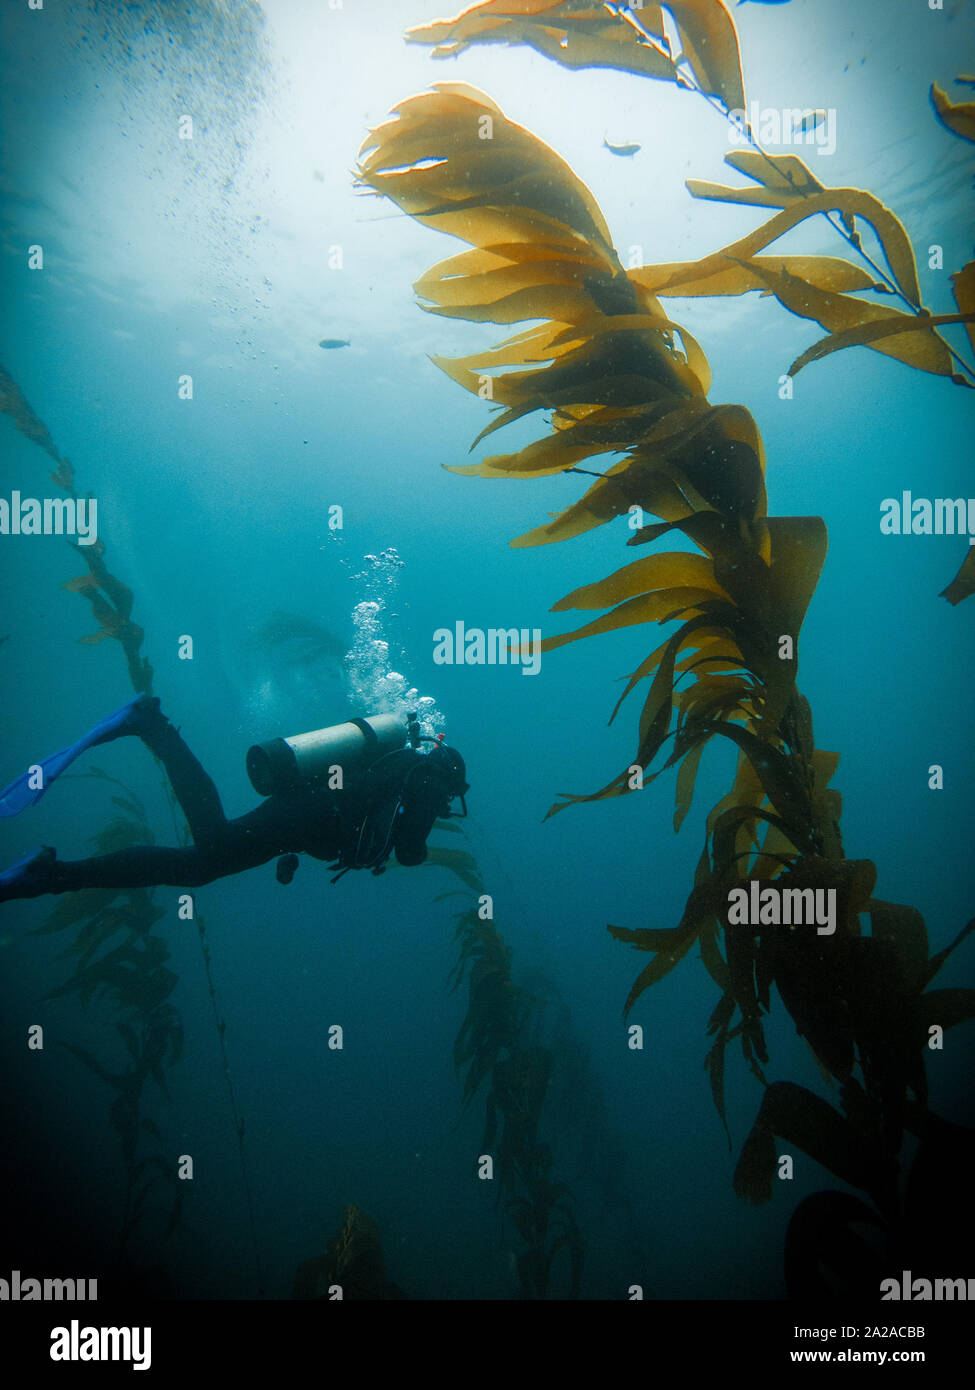 Underwater picture of scuba diver from the side in the kelp forest in the CHANNEL ISLANDS, California, USA Stock Photo